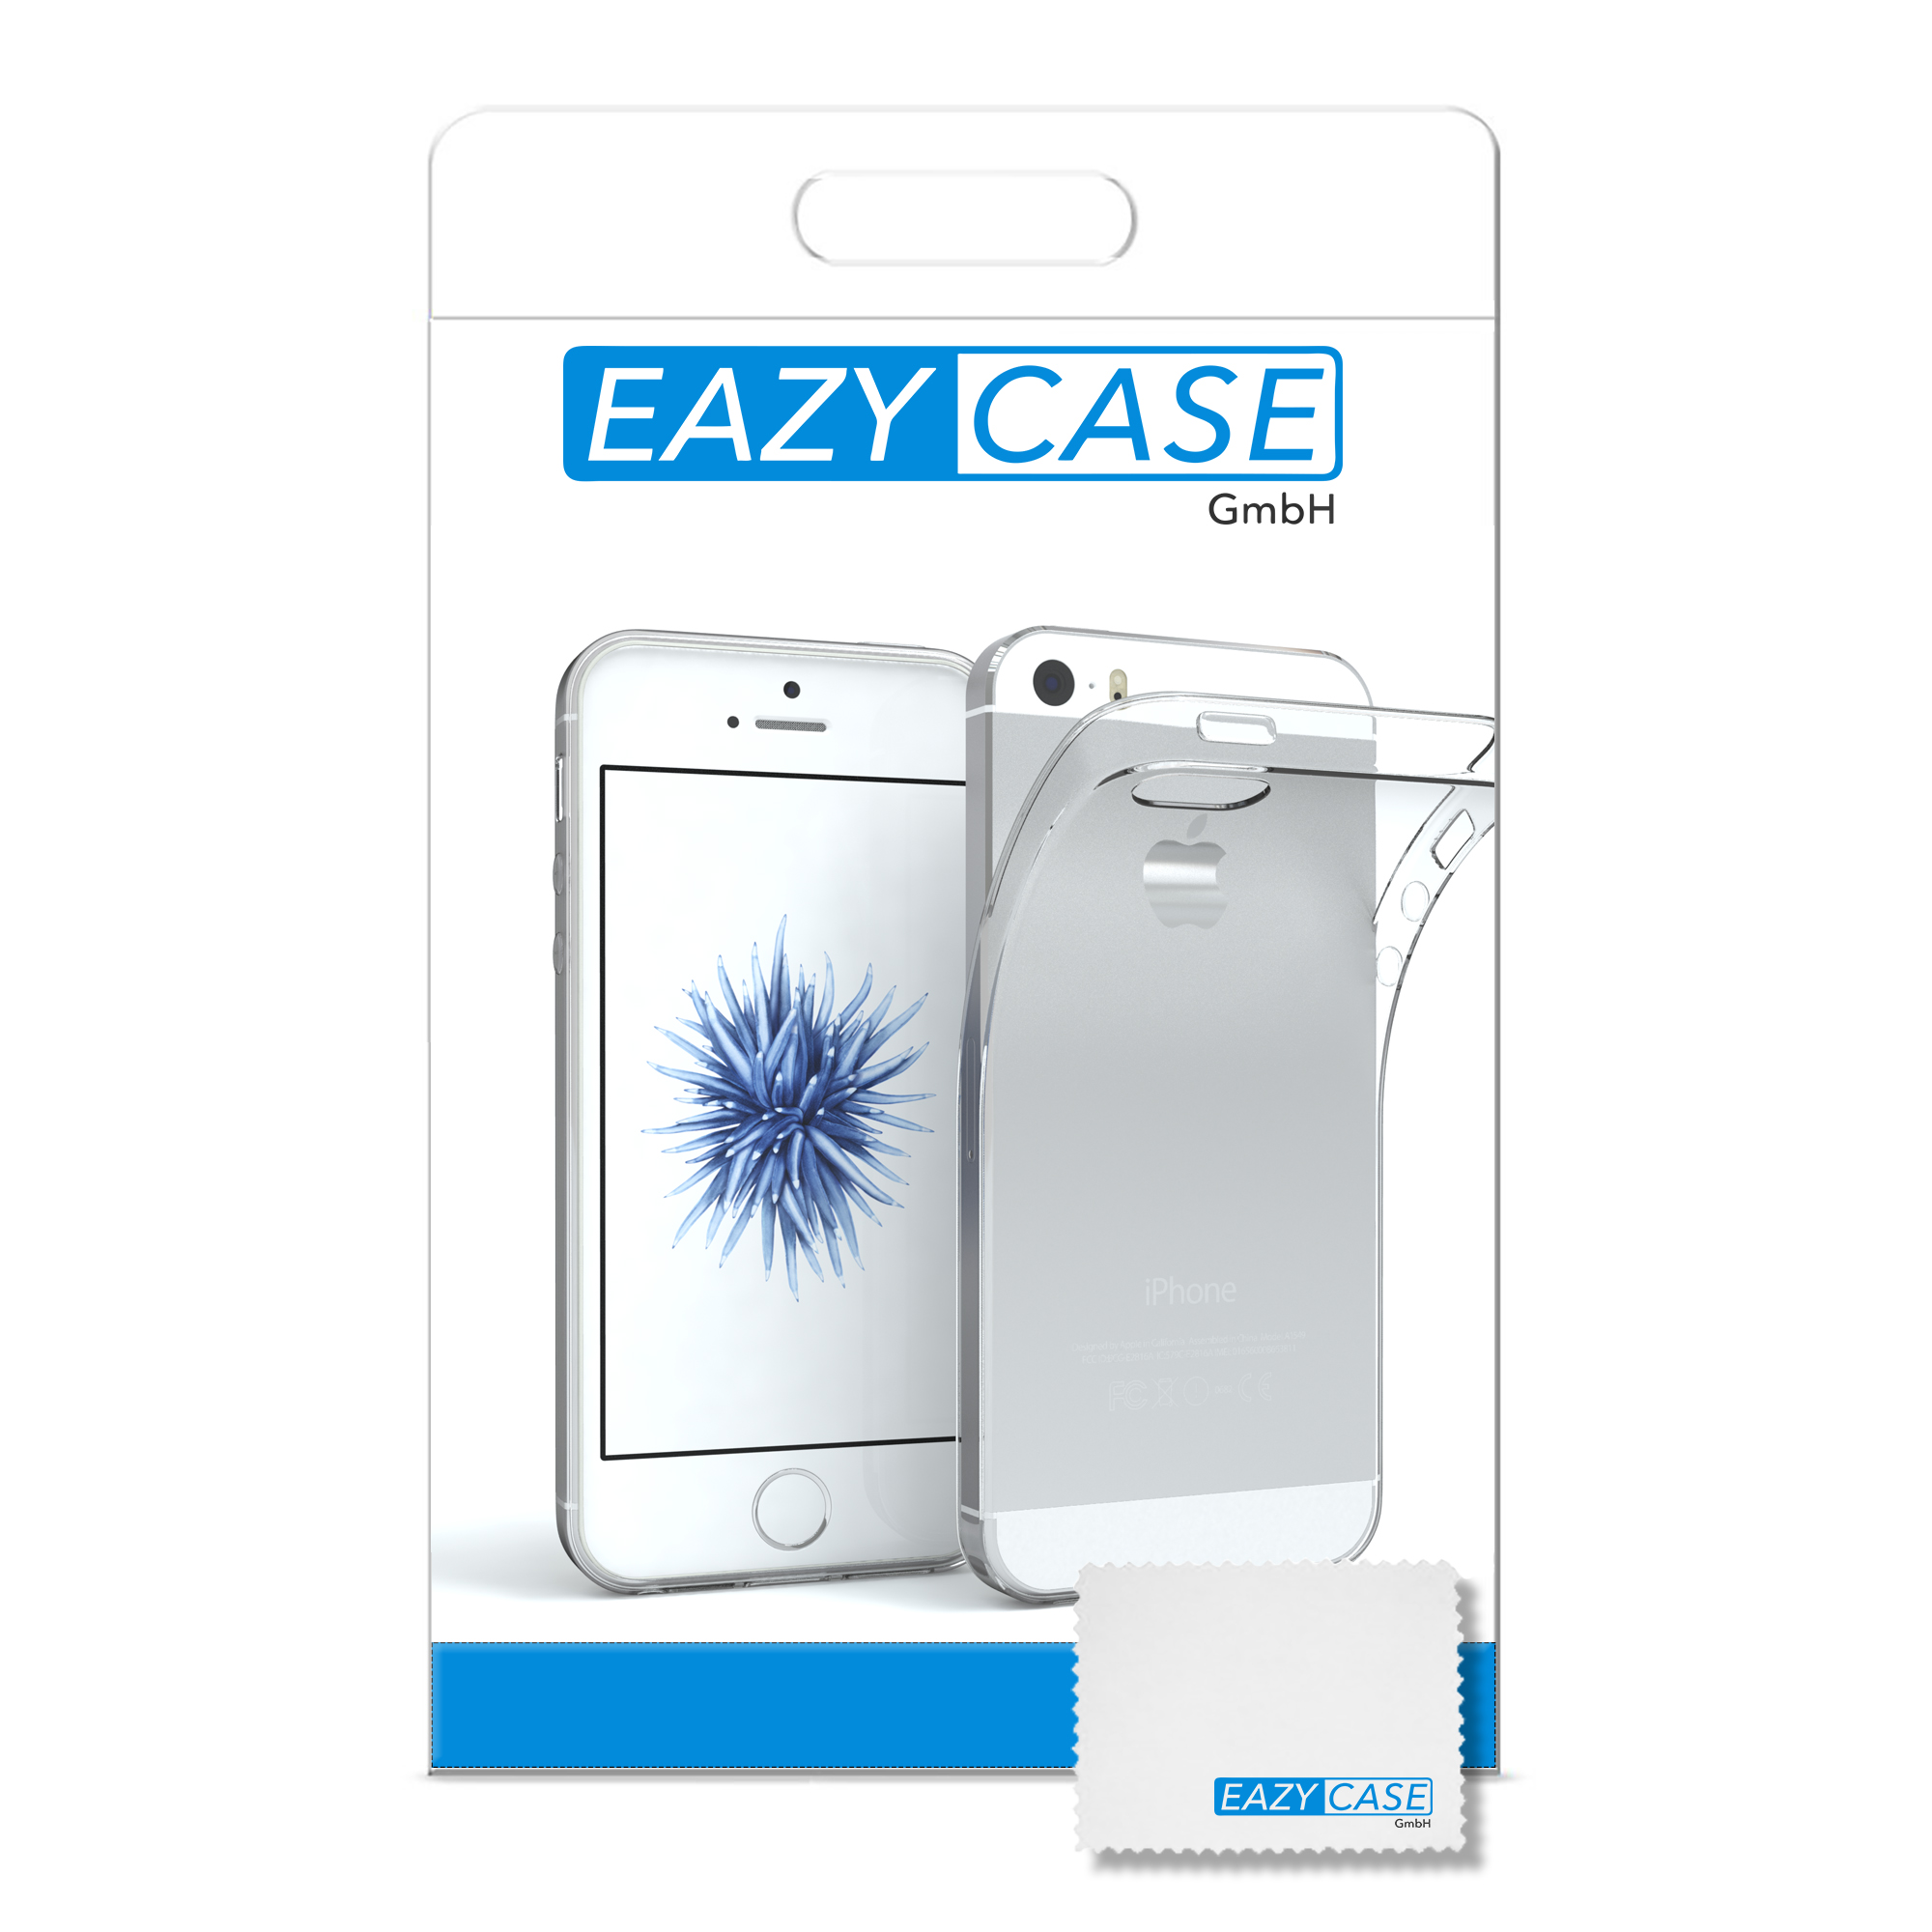 EAZY CASE Slimcover Clear, 2016, iPhone Durchsichtig SE iPhone Backcover, Apple, / 5S, 5